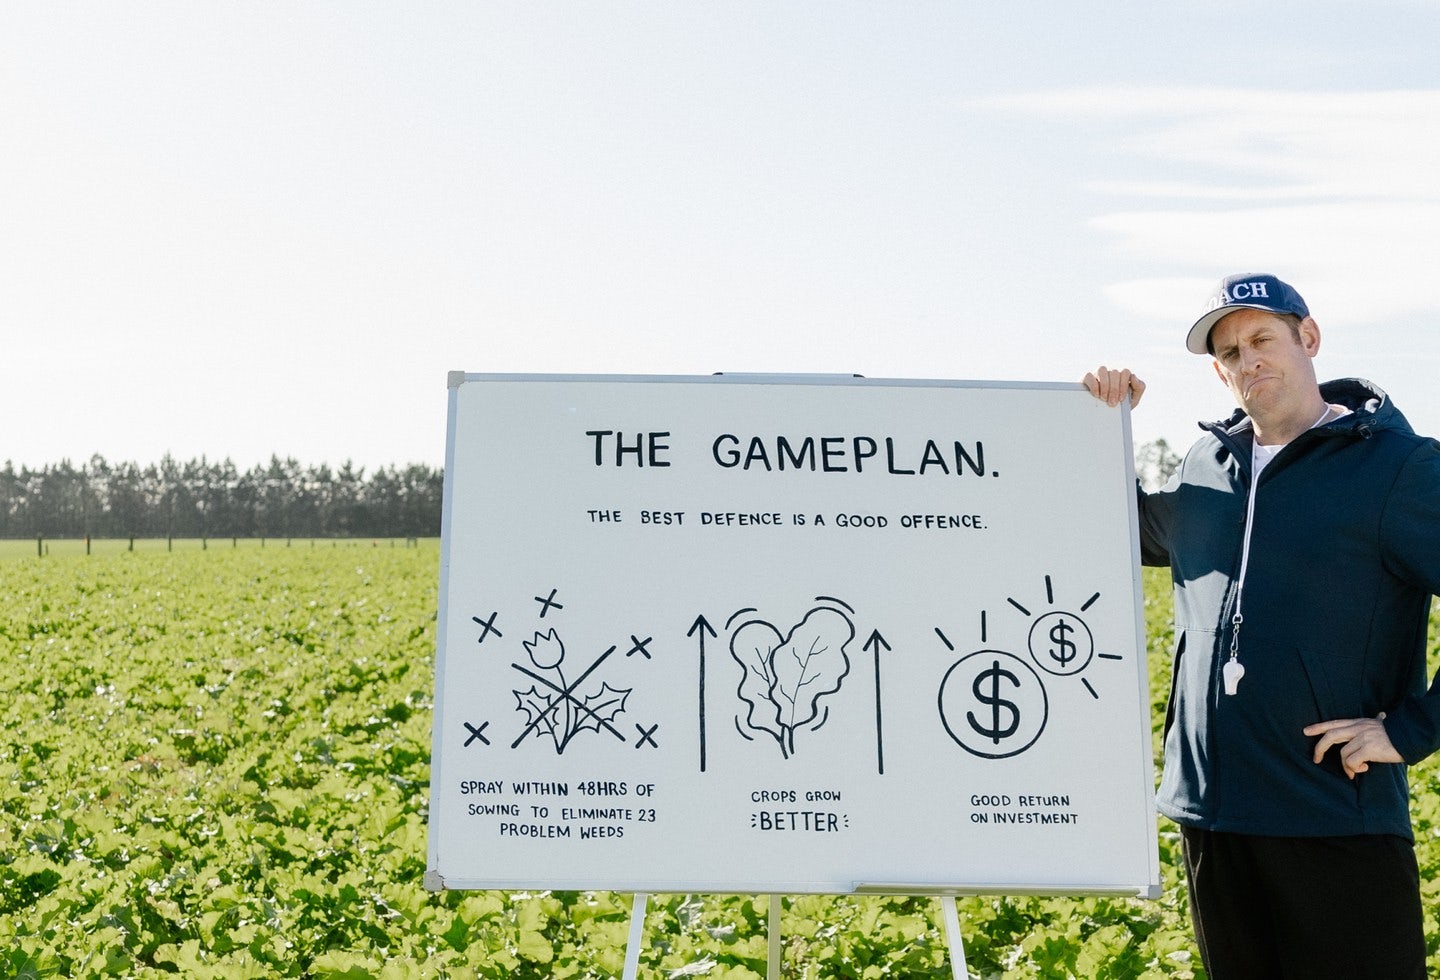 Person standing next to whiteboard in the middle of a field of crops